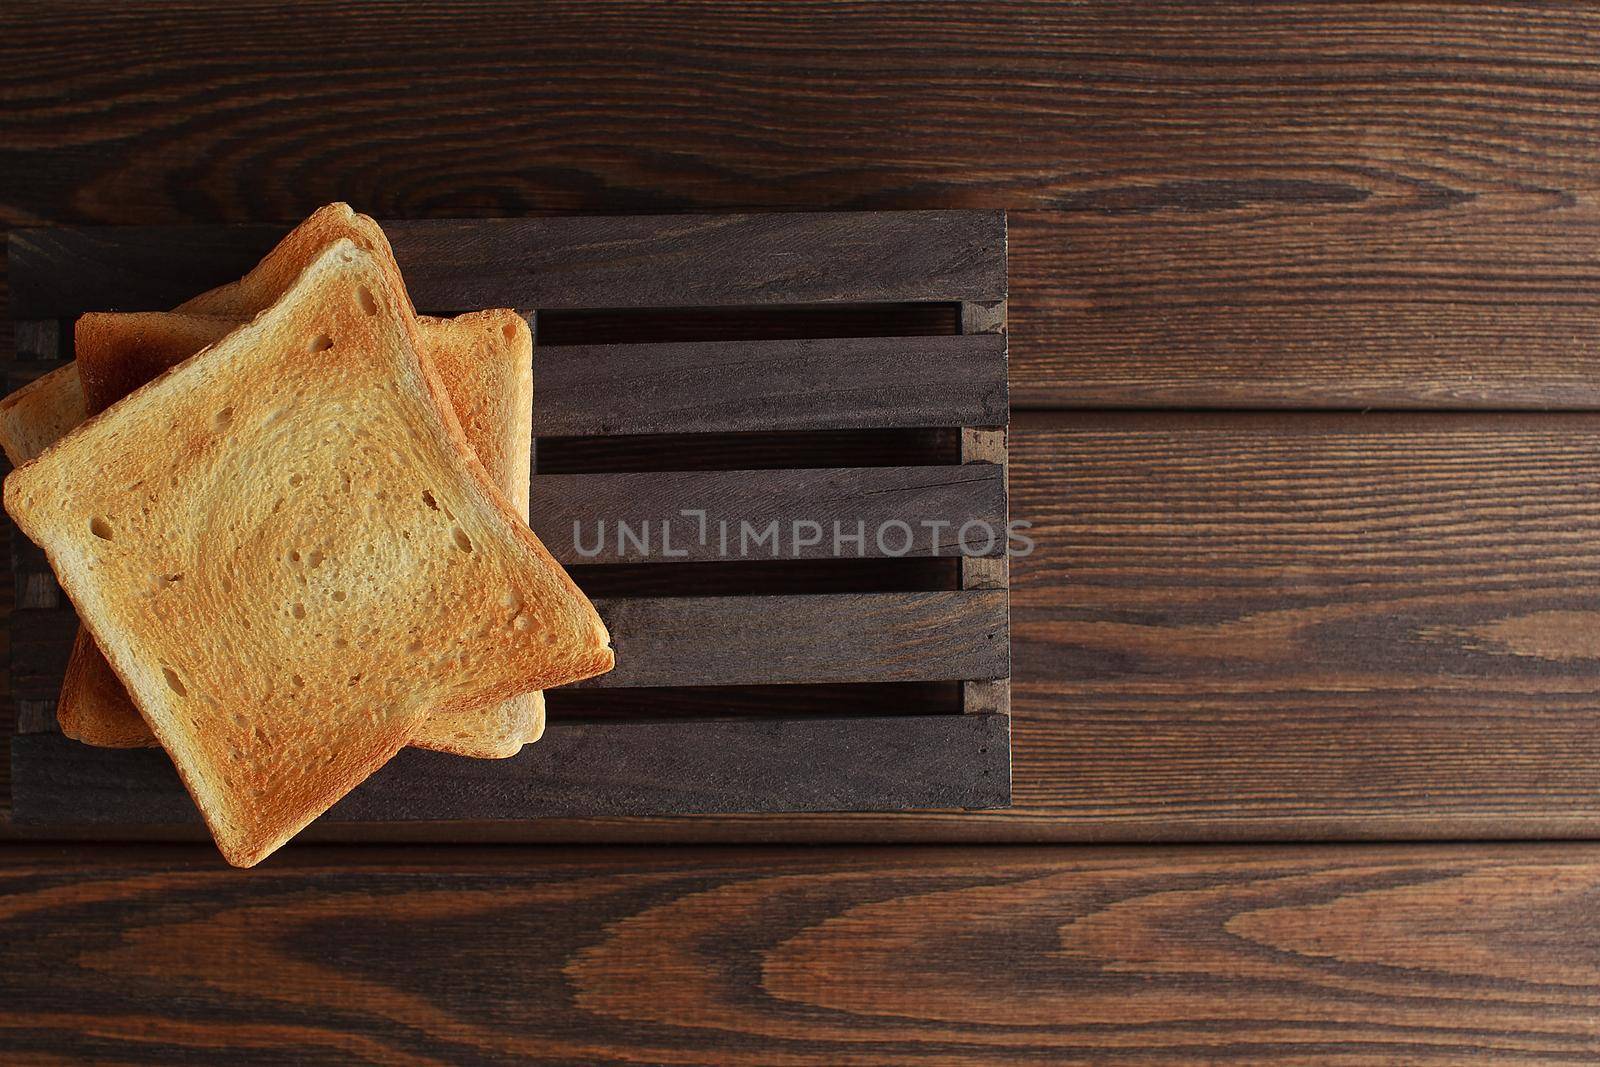 Several slices of toasted bread toasts on a wooden dark background.